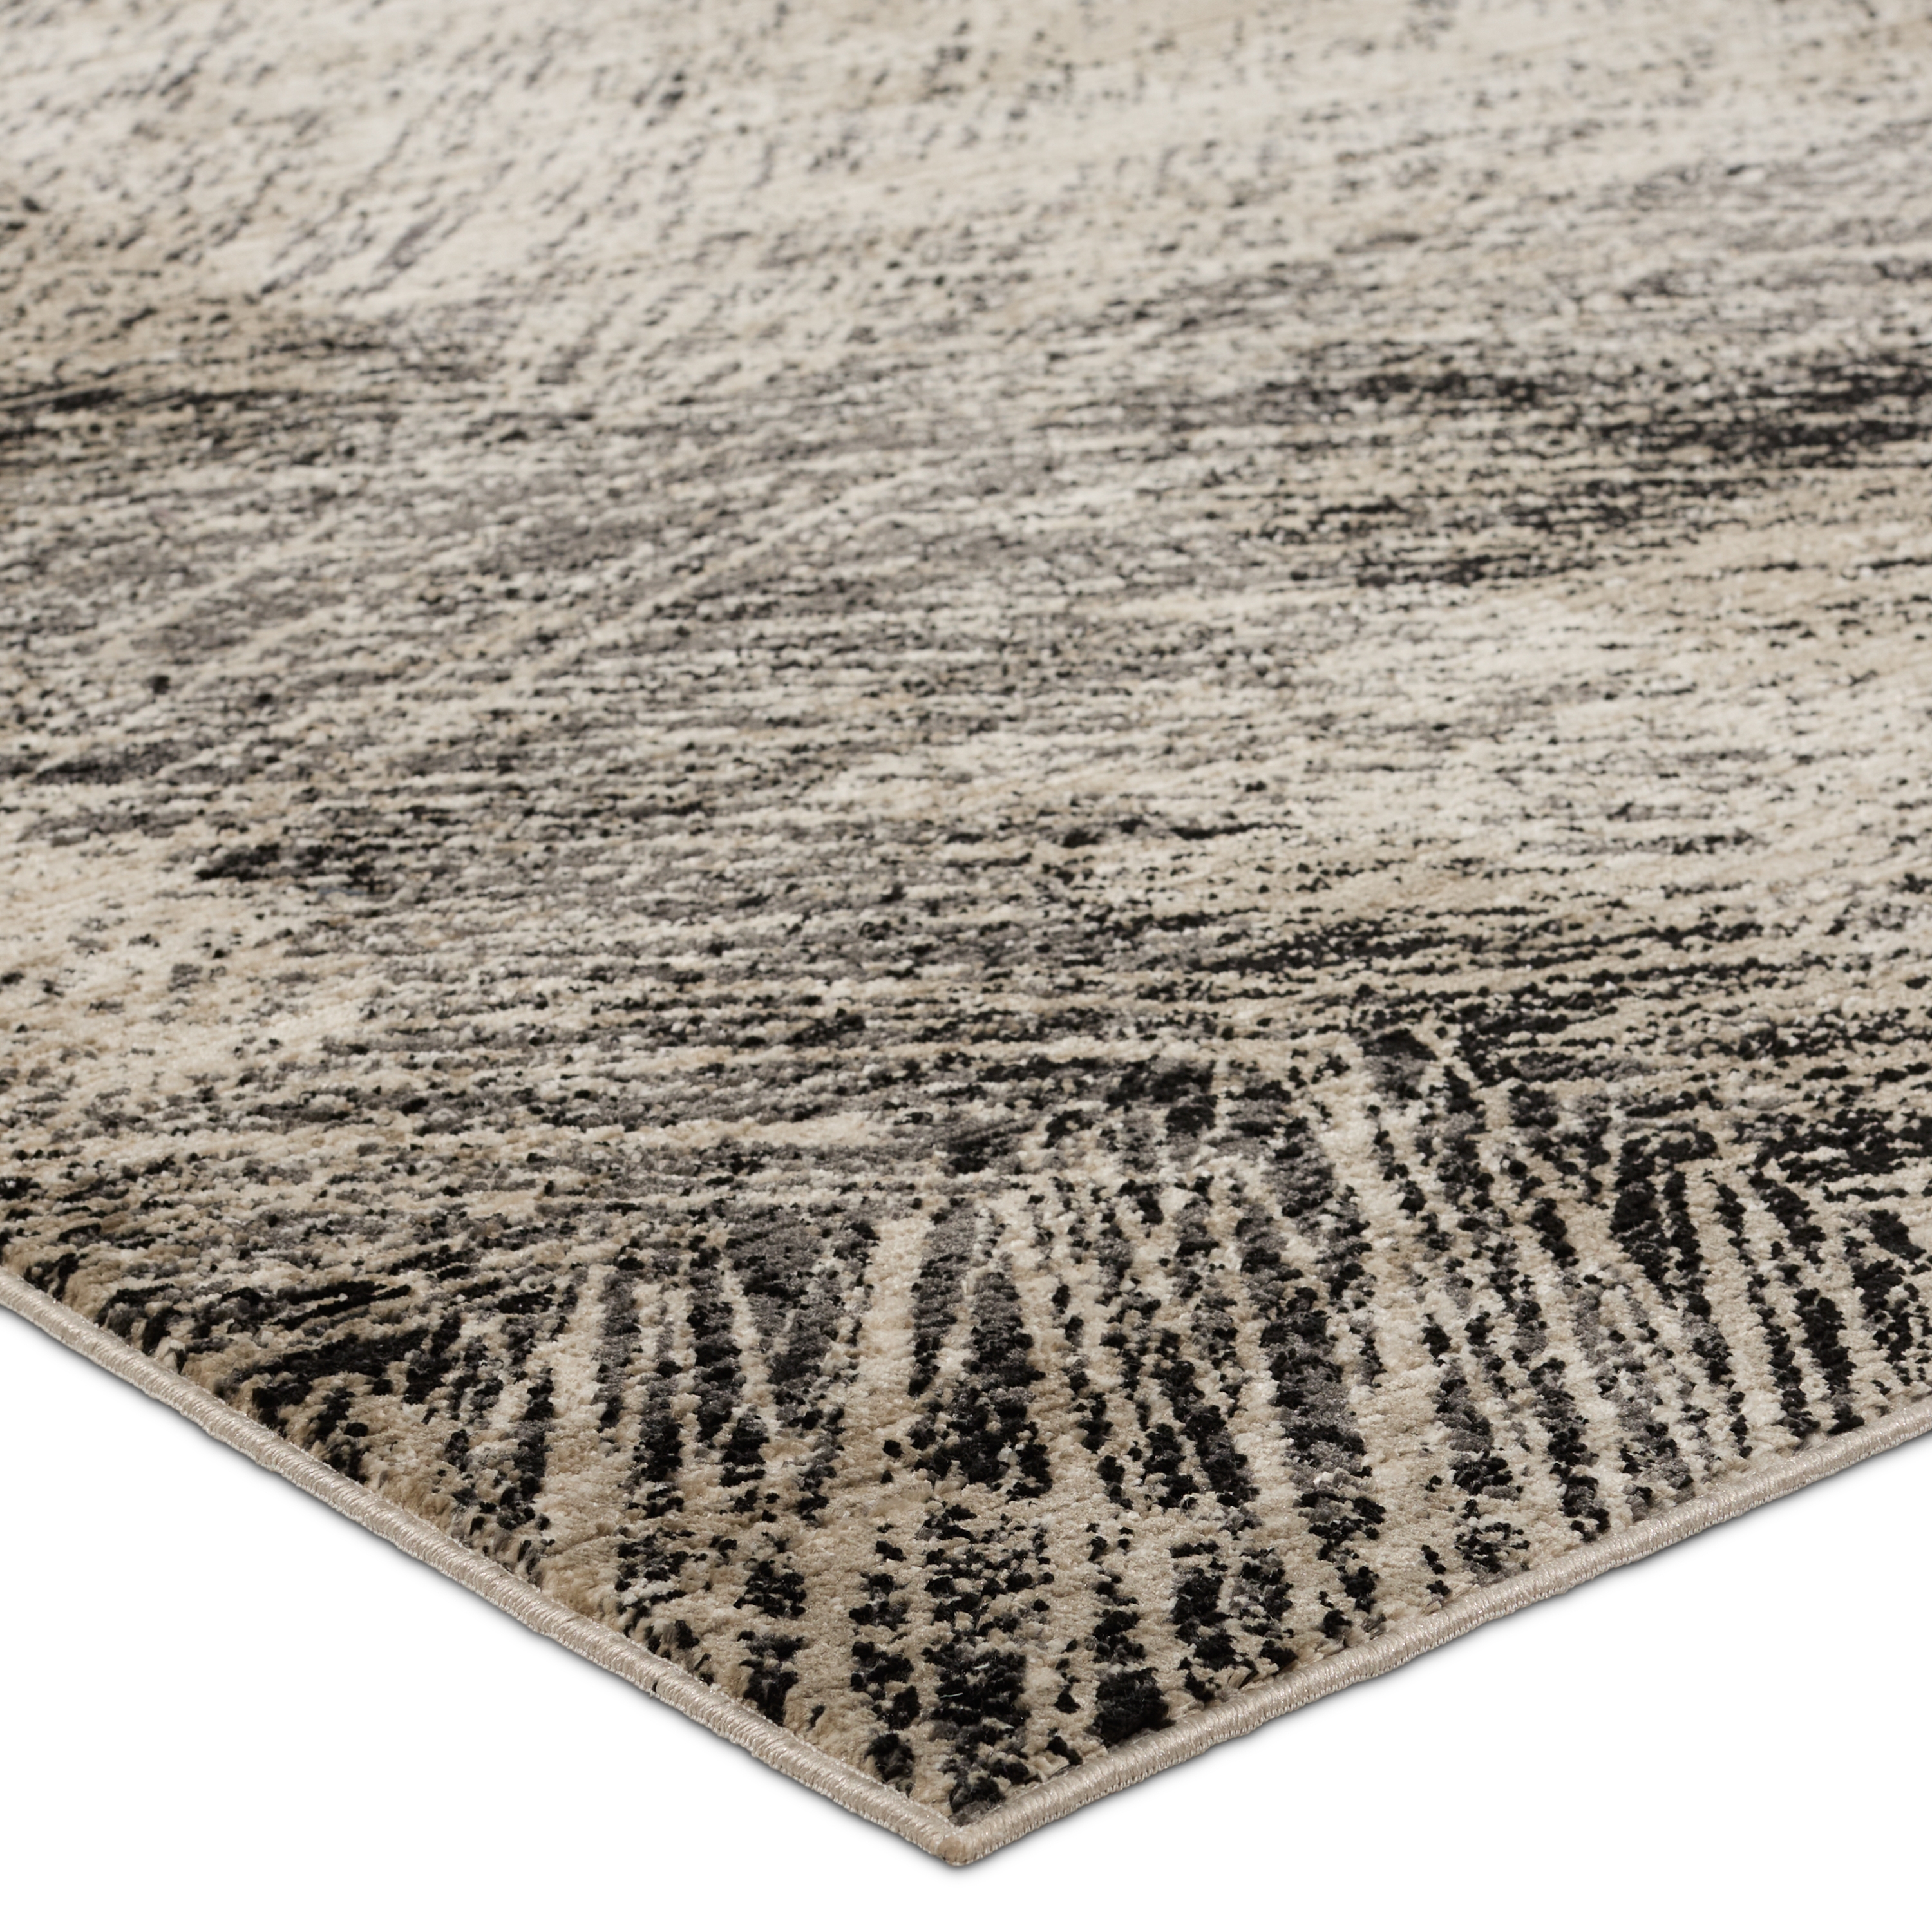 Dairon Abstract Black/ Taupe Area Rug (8'X10') - Image 1